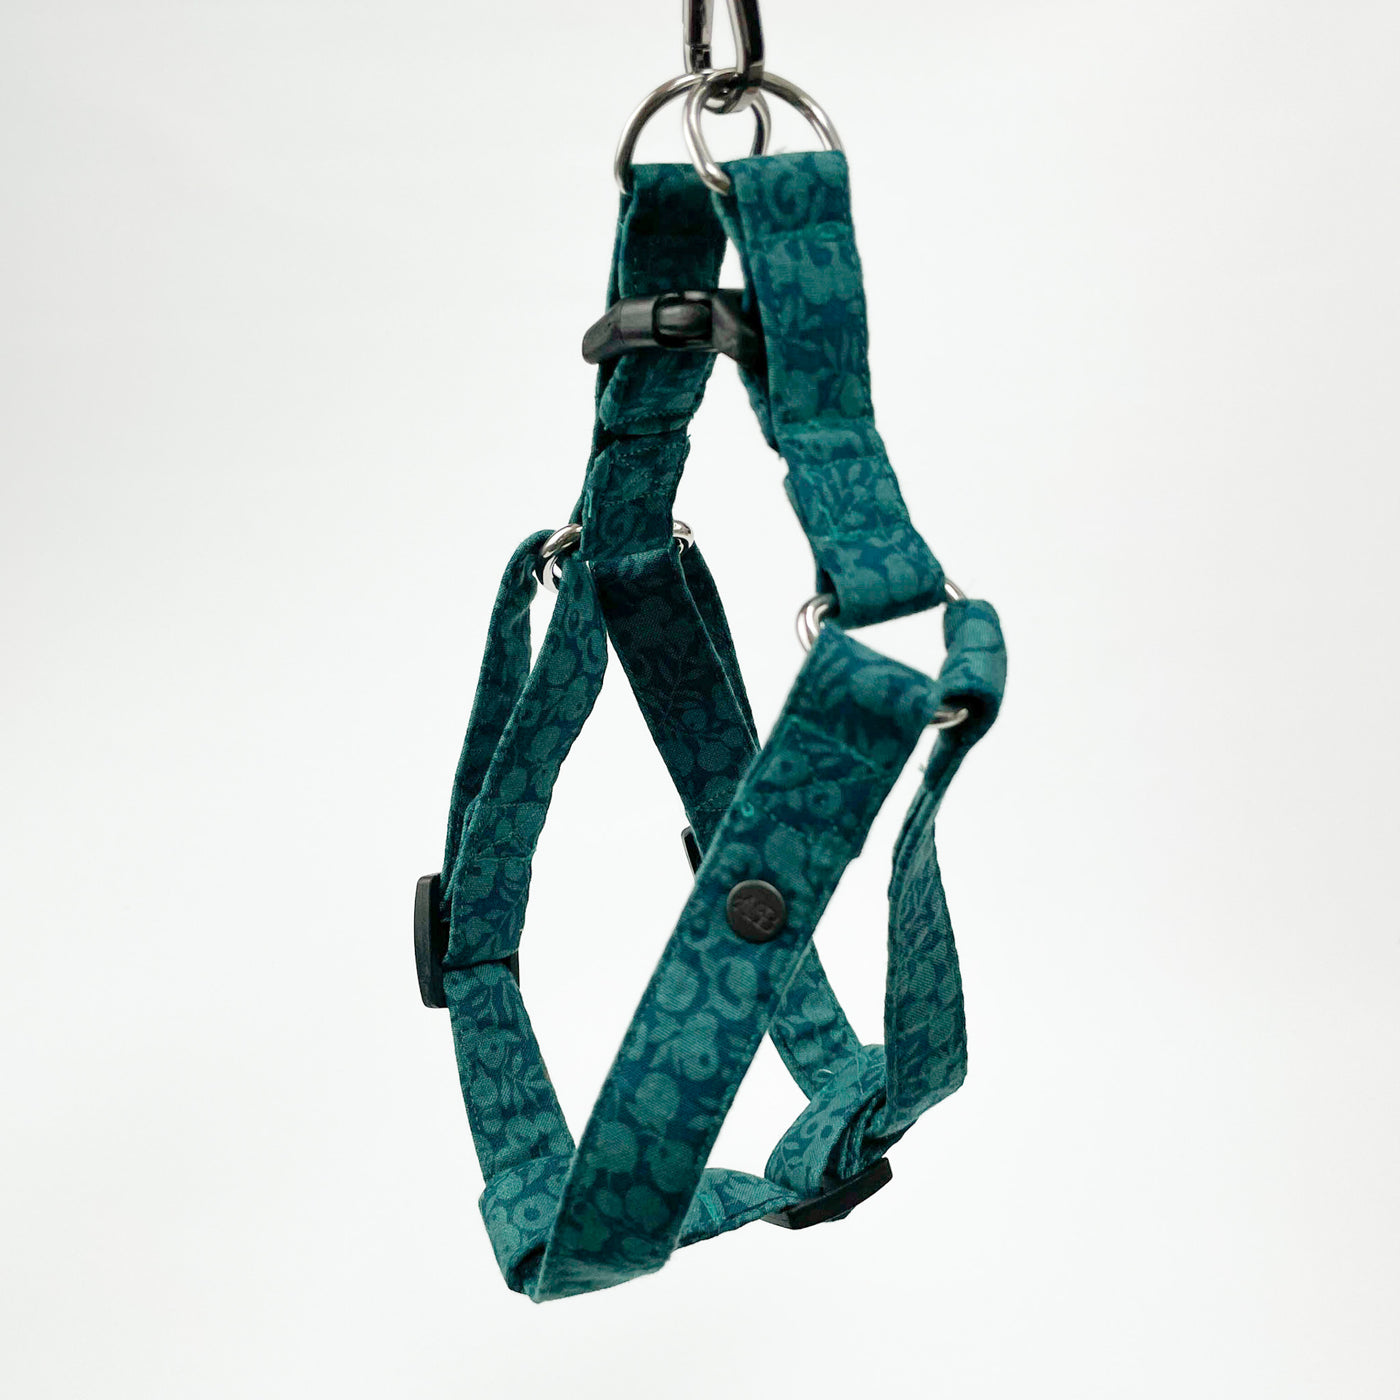 Liberty autumn emerald step in harness